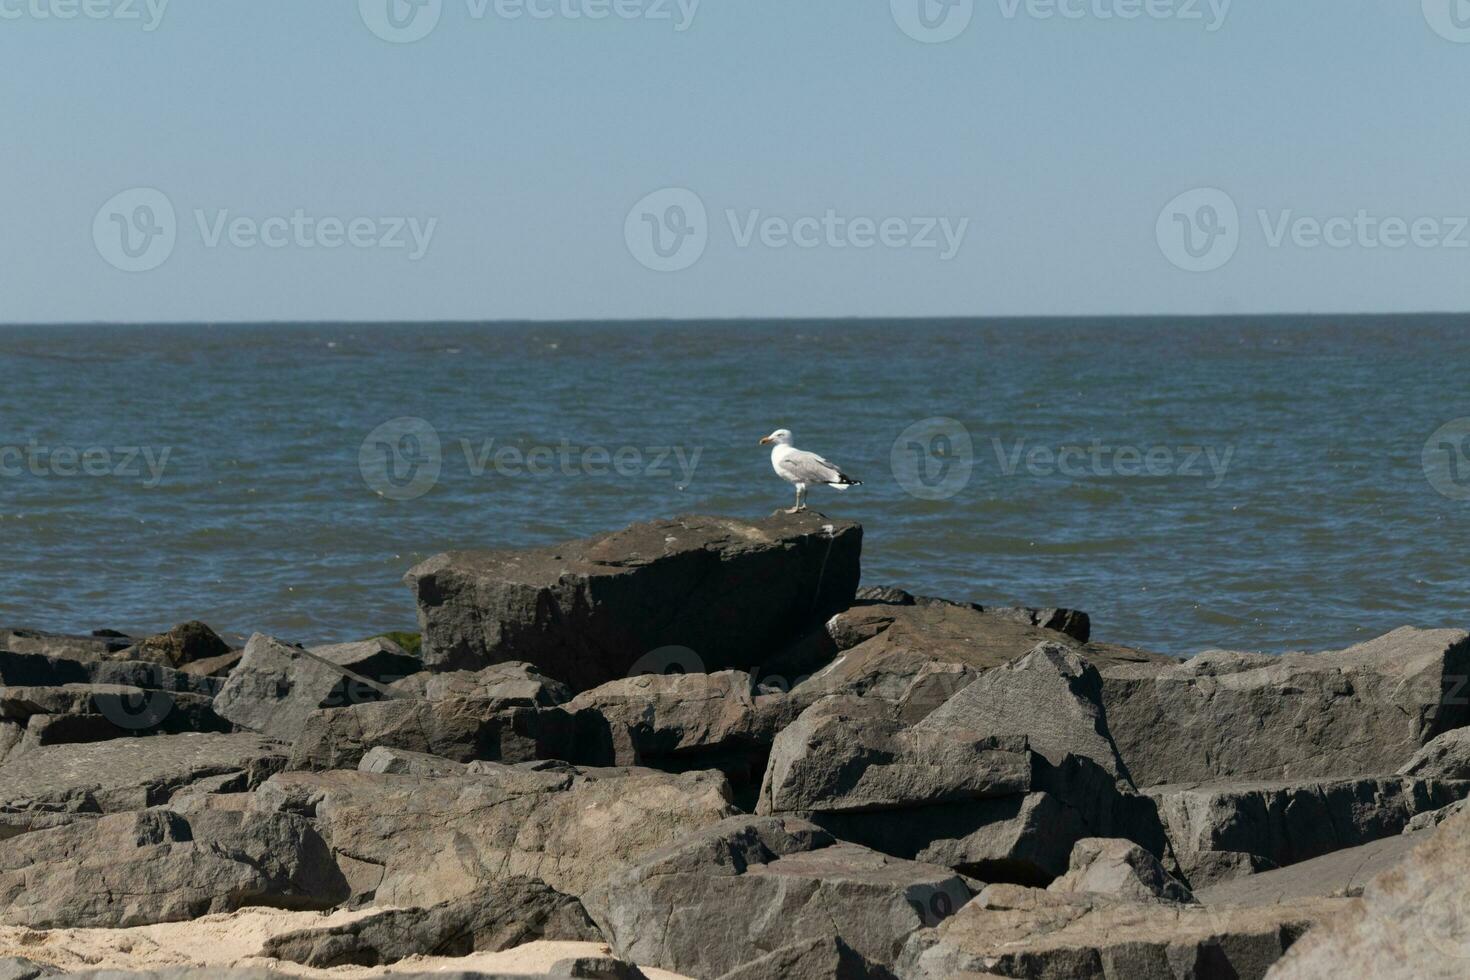 This majestic looking ring-billed seagull was standing on the jetty at the time I look this picture. This shorebird is what you visualize when going to the beach. The pretty grey and white feathers. photo